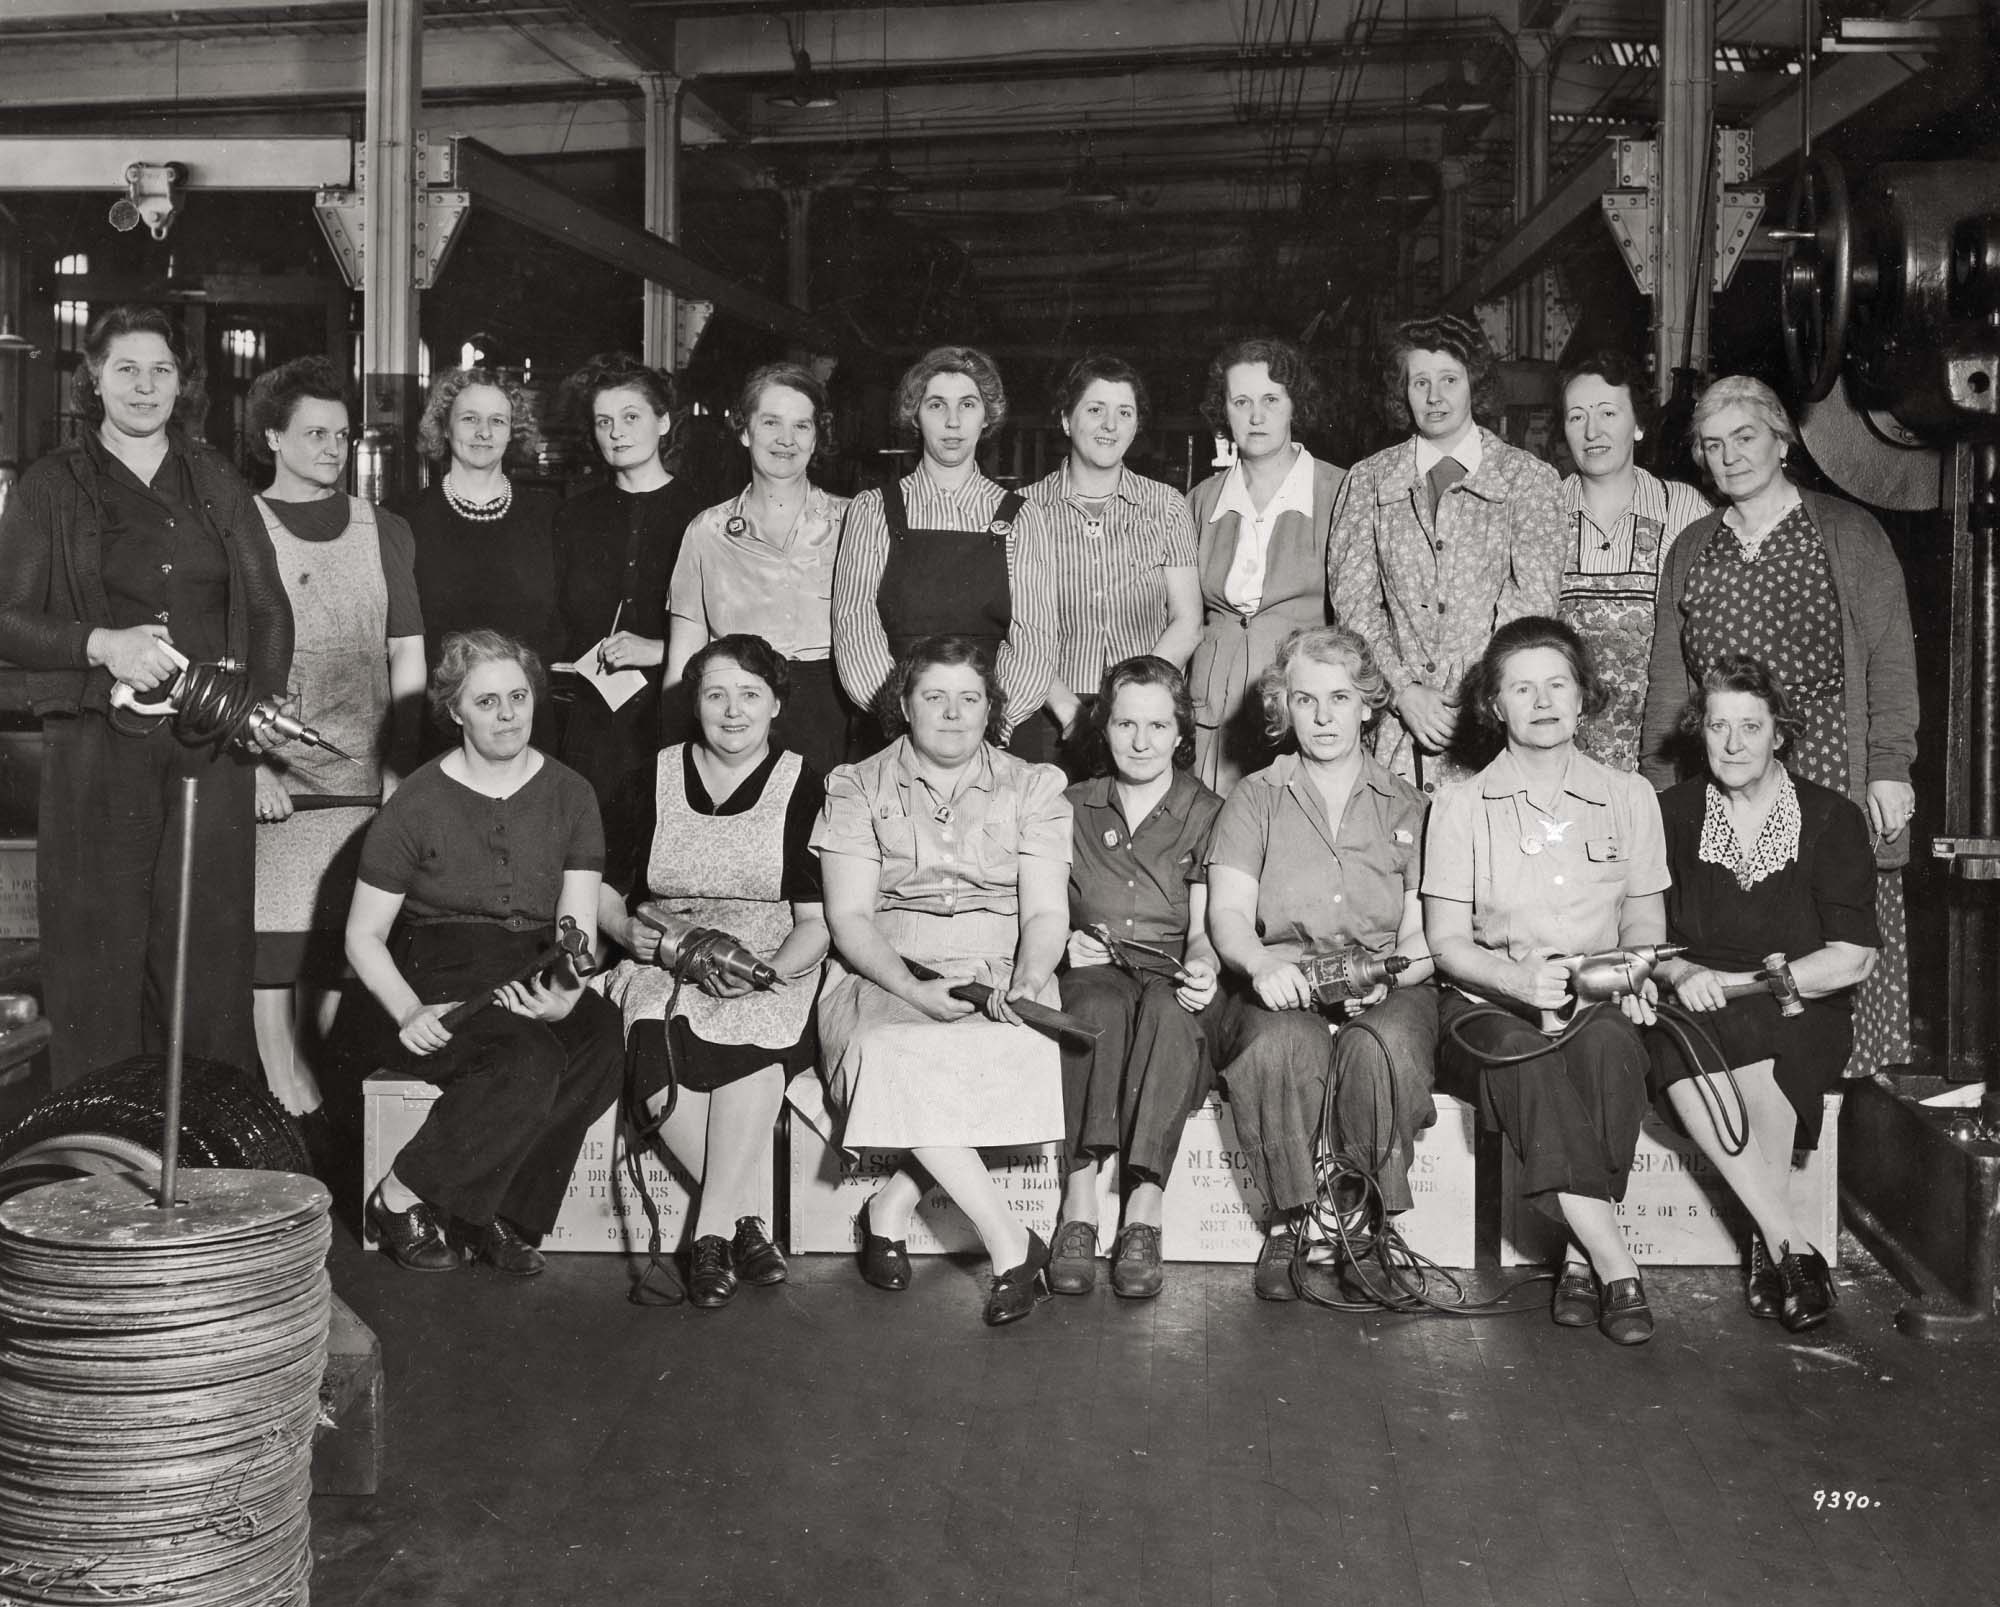 Hyde Park, Massachusetts, 1945. A group photo of women assembly workers, many with their tools, in Building C of the Sturtevant factory. A variety of commercial and industrial heaters were built in this building section.